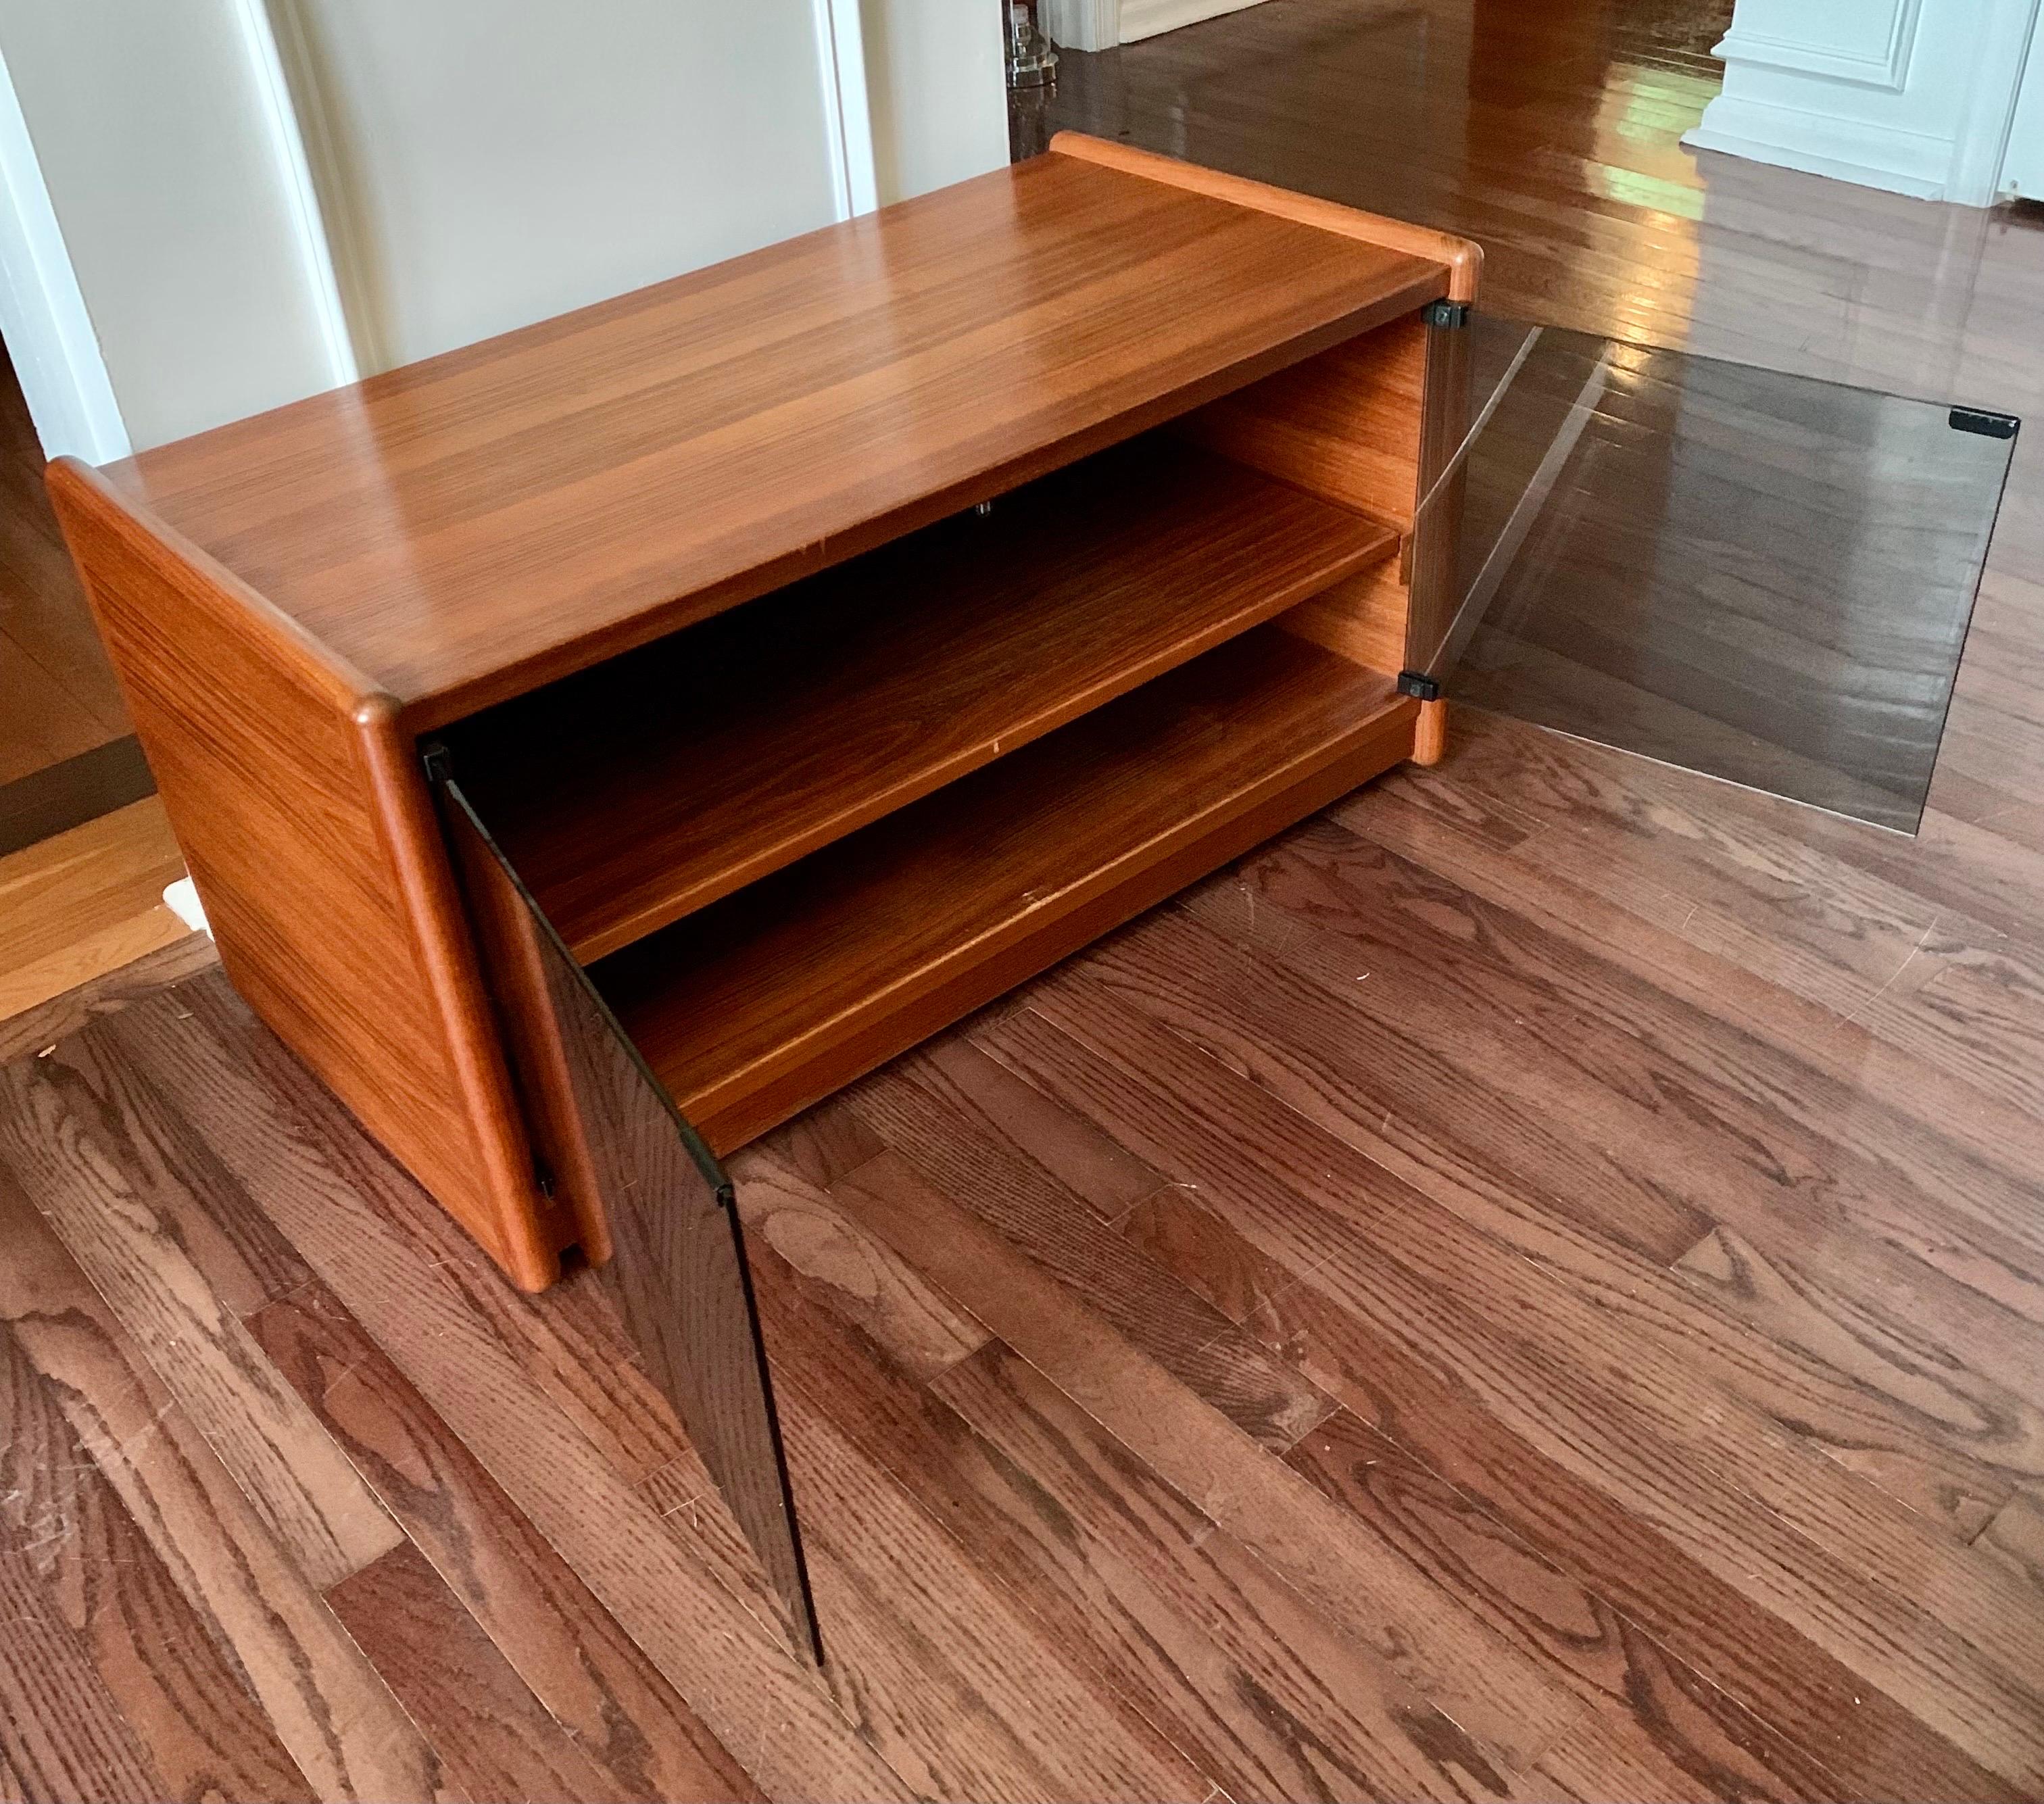 Very clean Vildbjerg Mobelfabrik teak rolling credenza/cabinet with smoked glass. Glass doors close magnetically and cabinetry features an internal pullout shelf. Great for smaller spaces due to its size and maneuverability. Wheels move smoothly. In